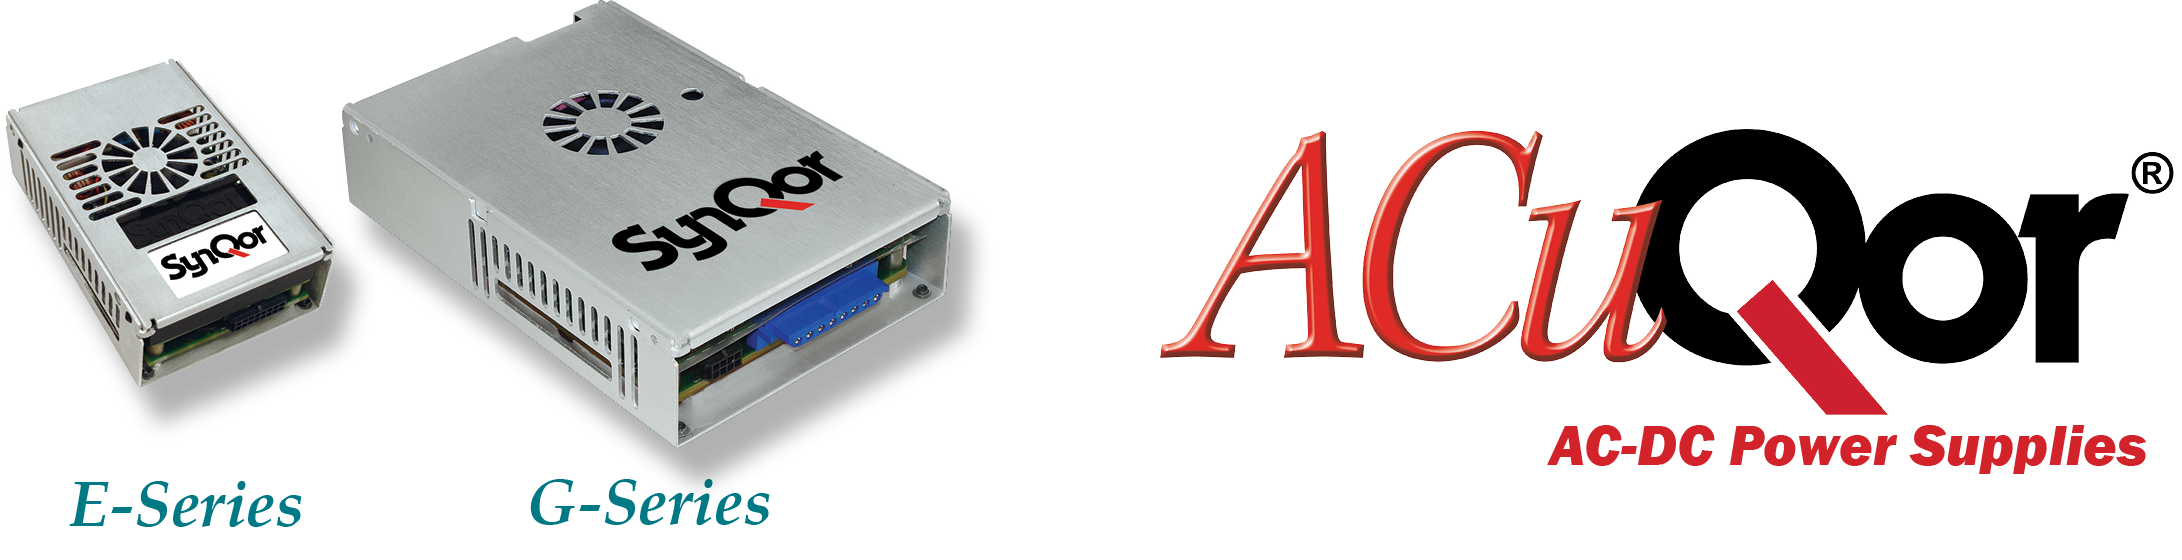 ACuQor - Industrial-Grade AC-DC Power Supplies with PFC